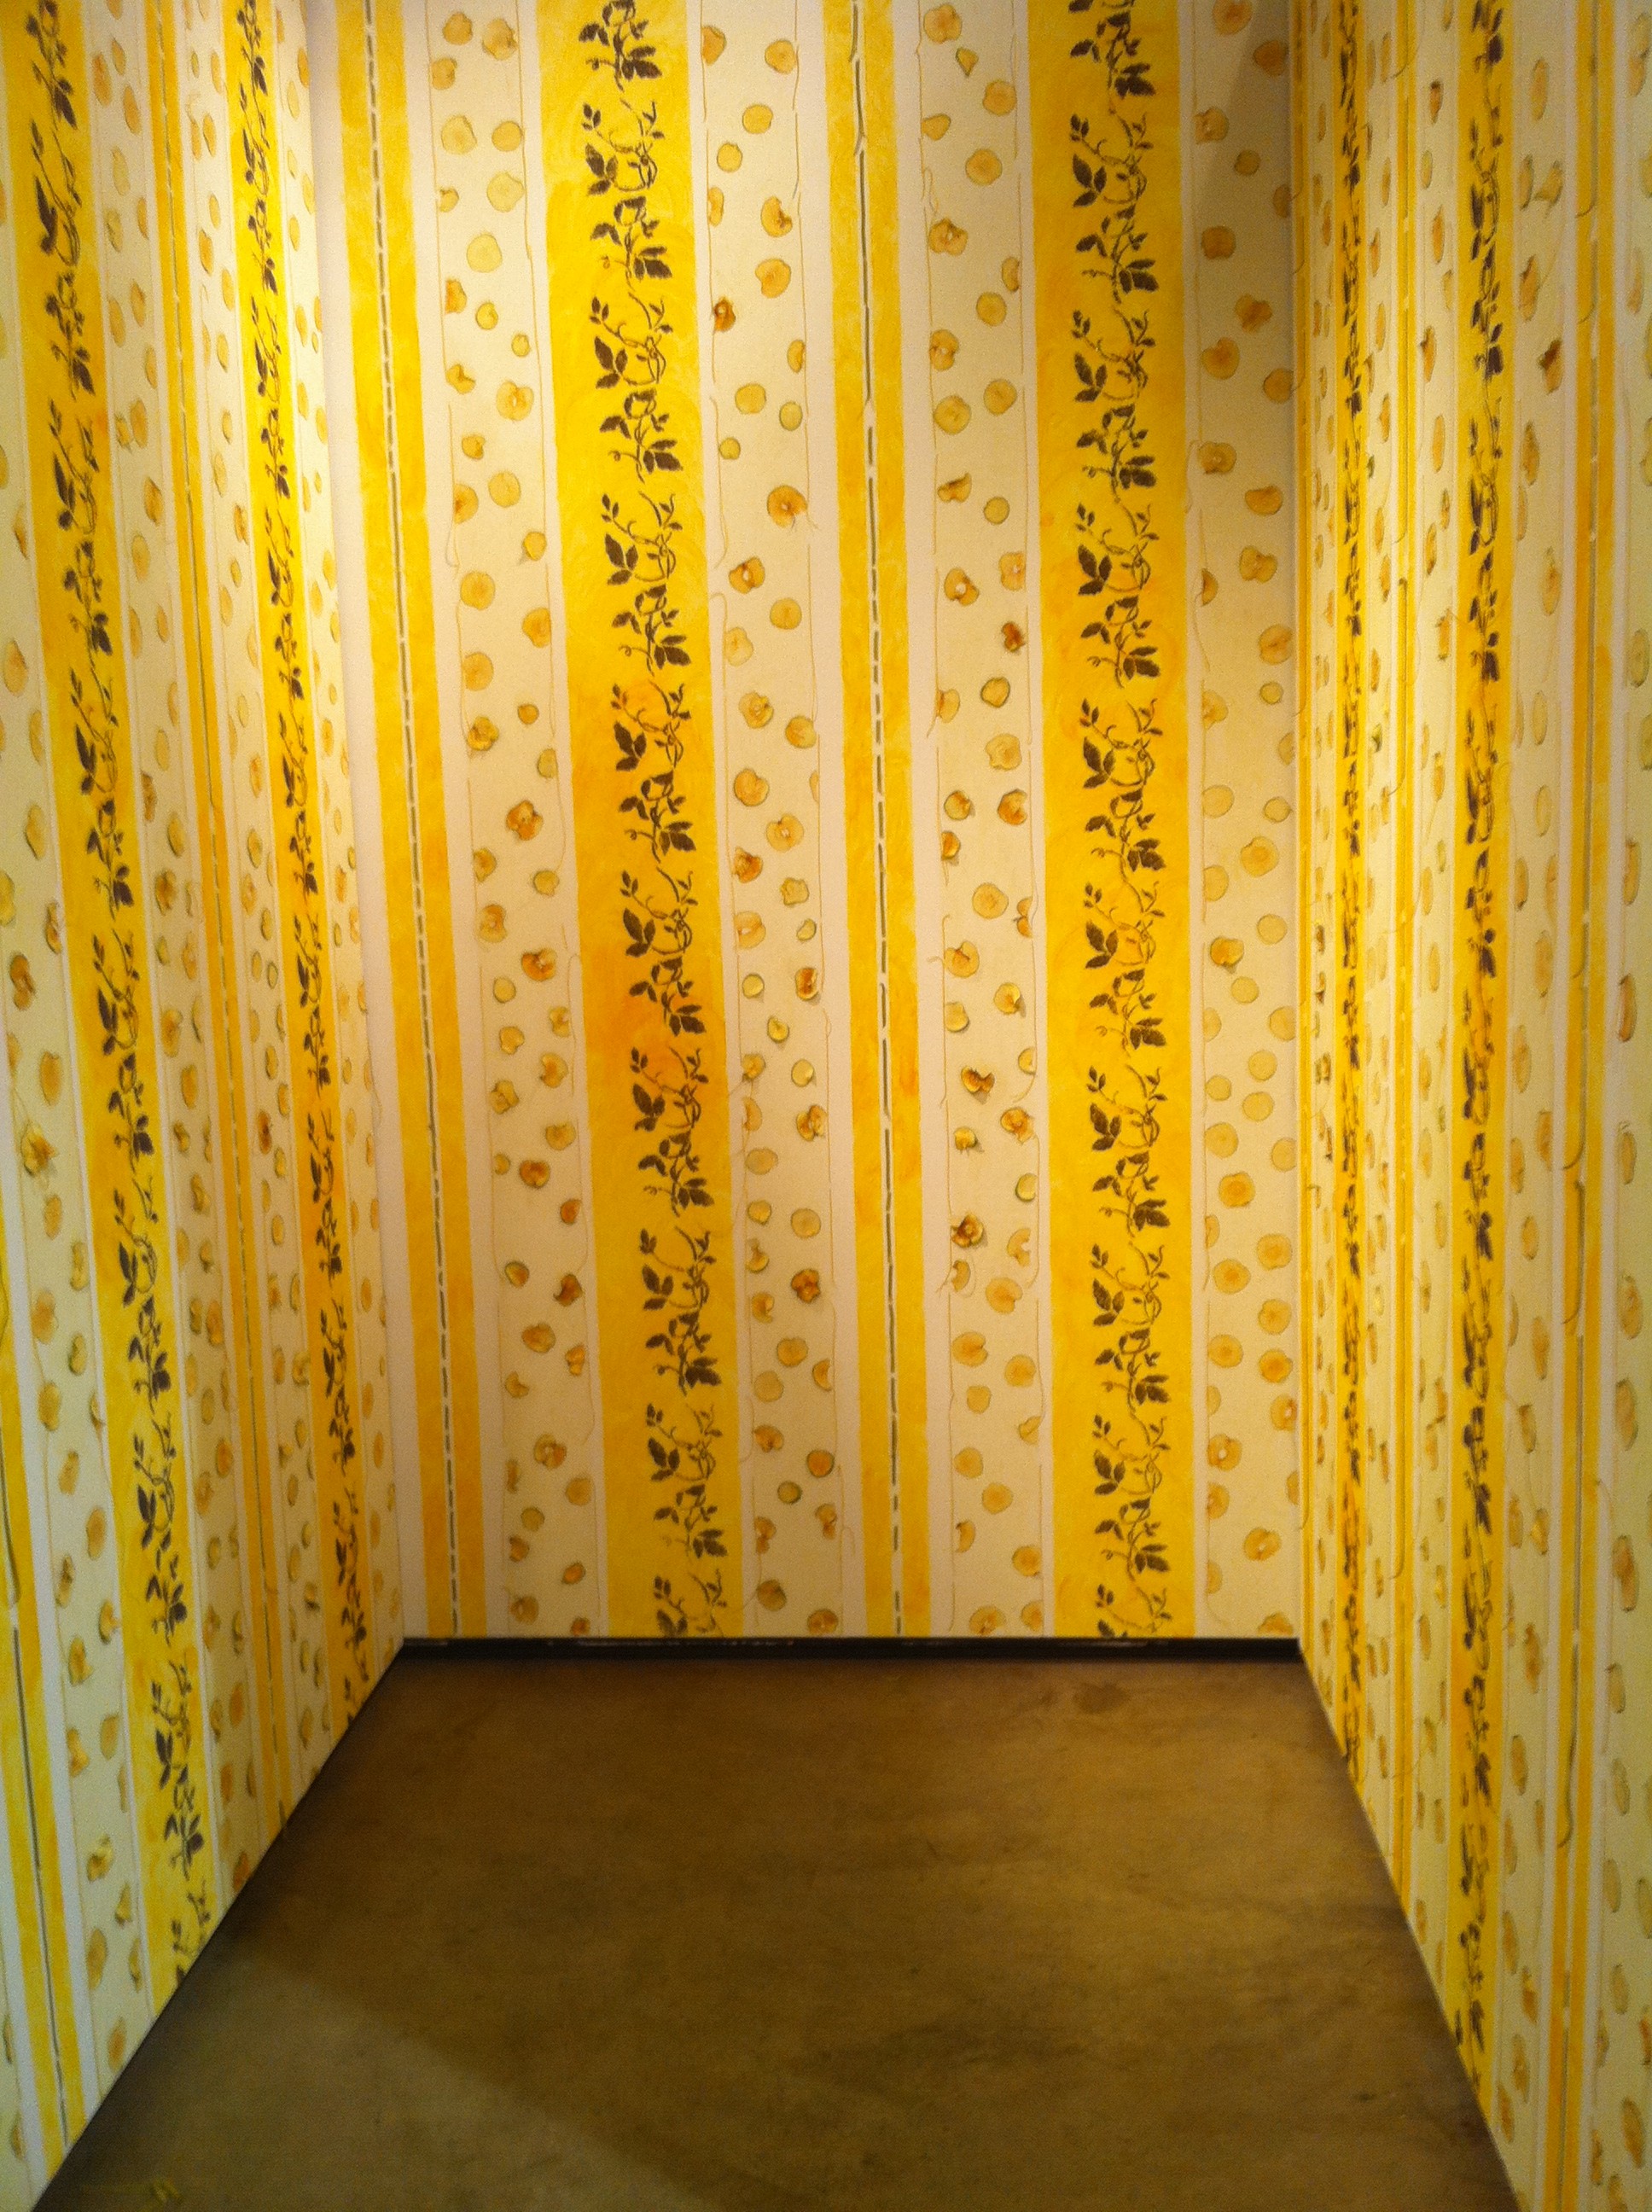 Nibble On The Yellow Wallpaper At Redline